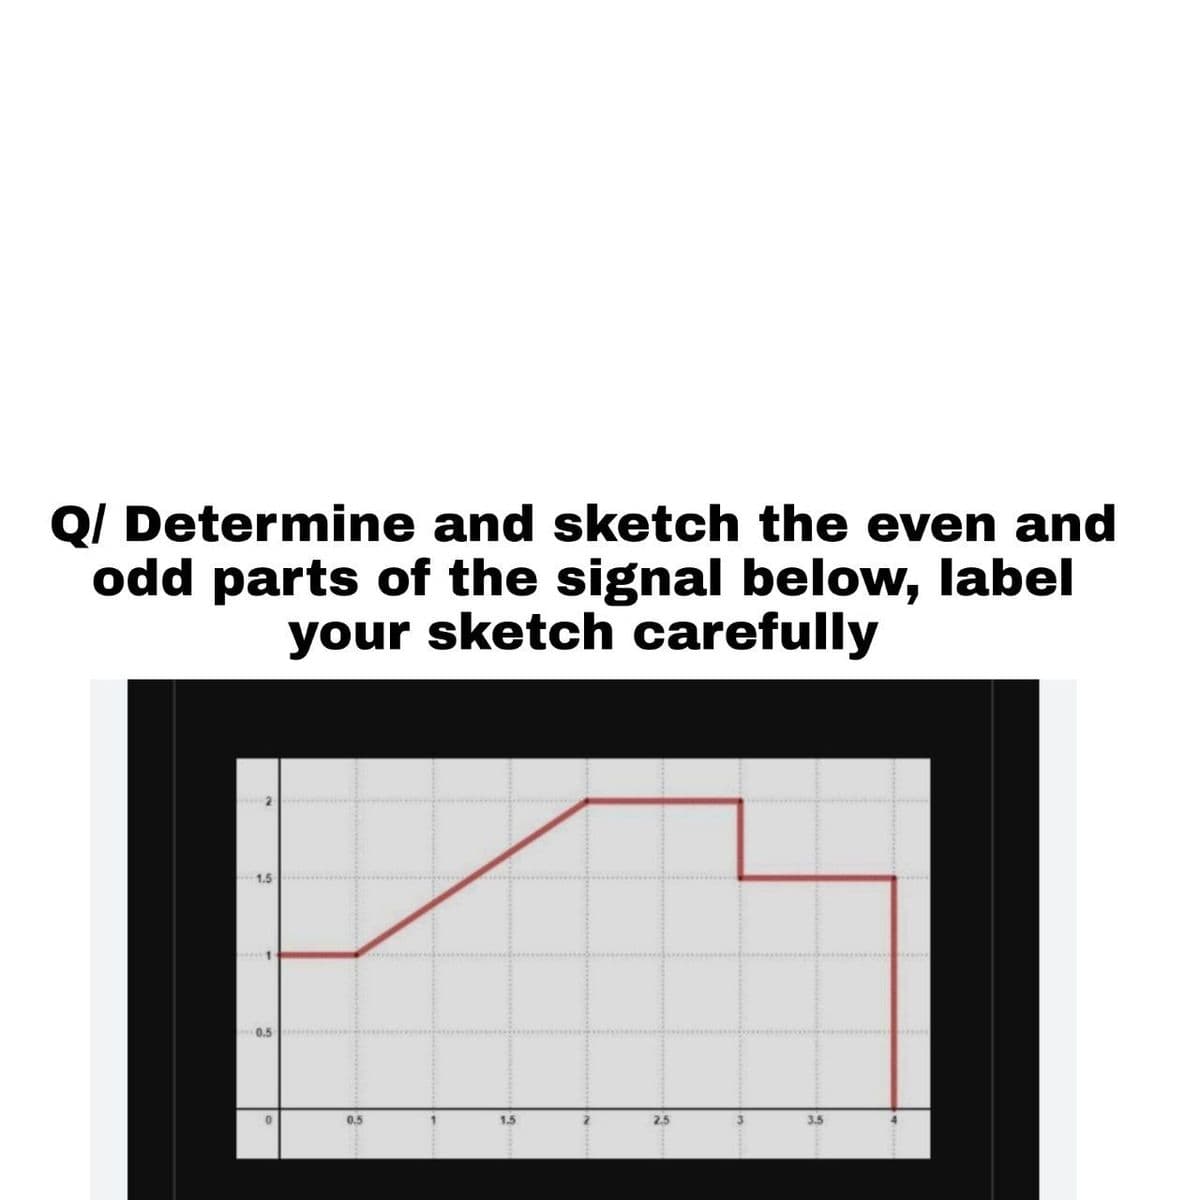 Q/ Determine and sketch the even and
odd parts of the signal below, label
your sketch carefully
1.5
1
0.5
0
1.5
2.5
3.5
0.5